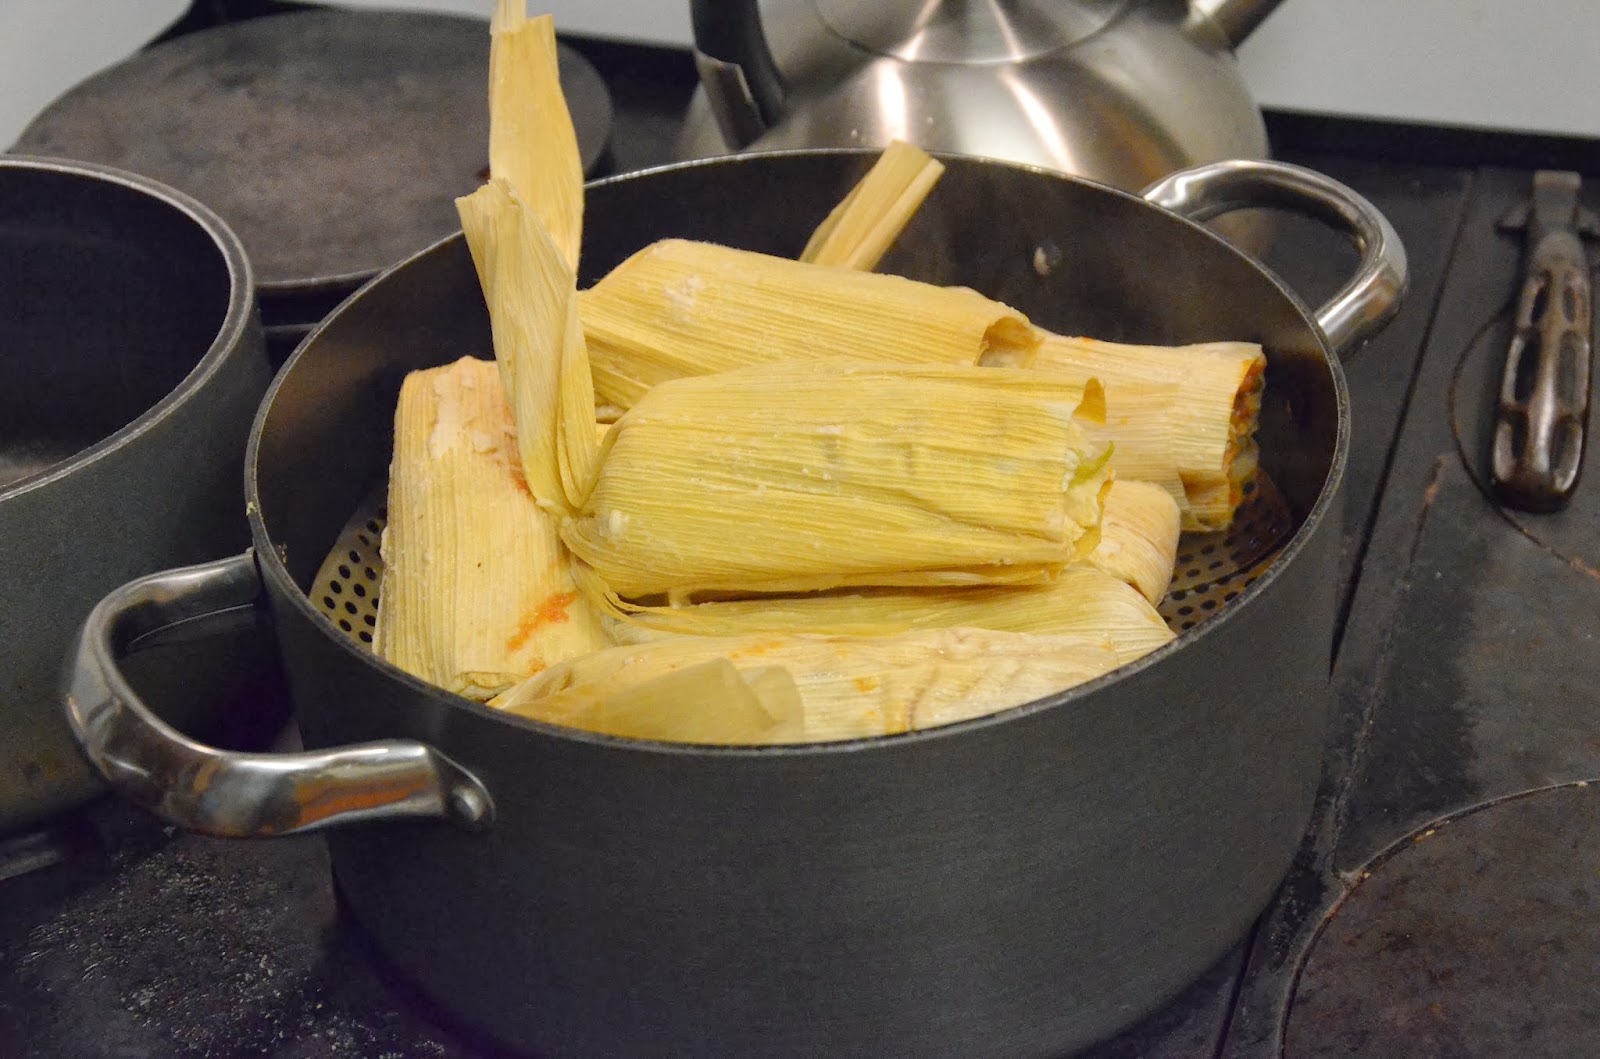 Our Oakland how to cook (or reheat) a tamale